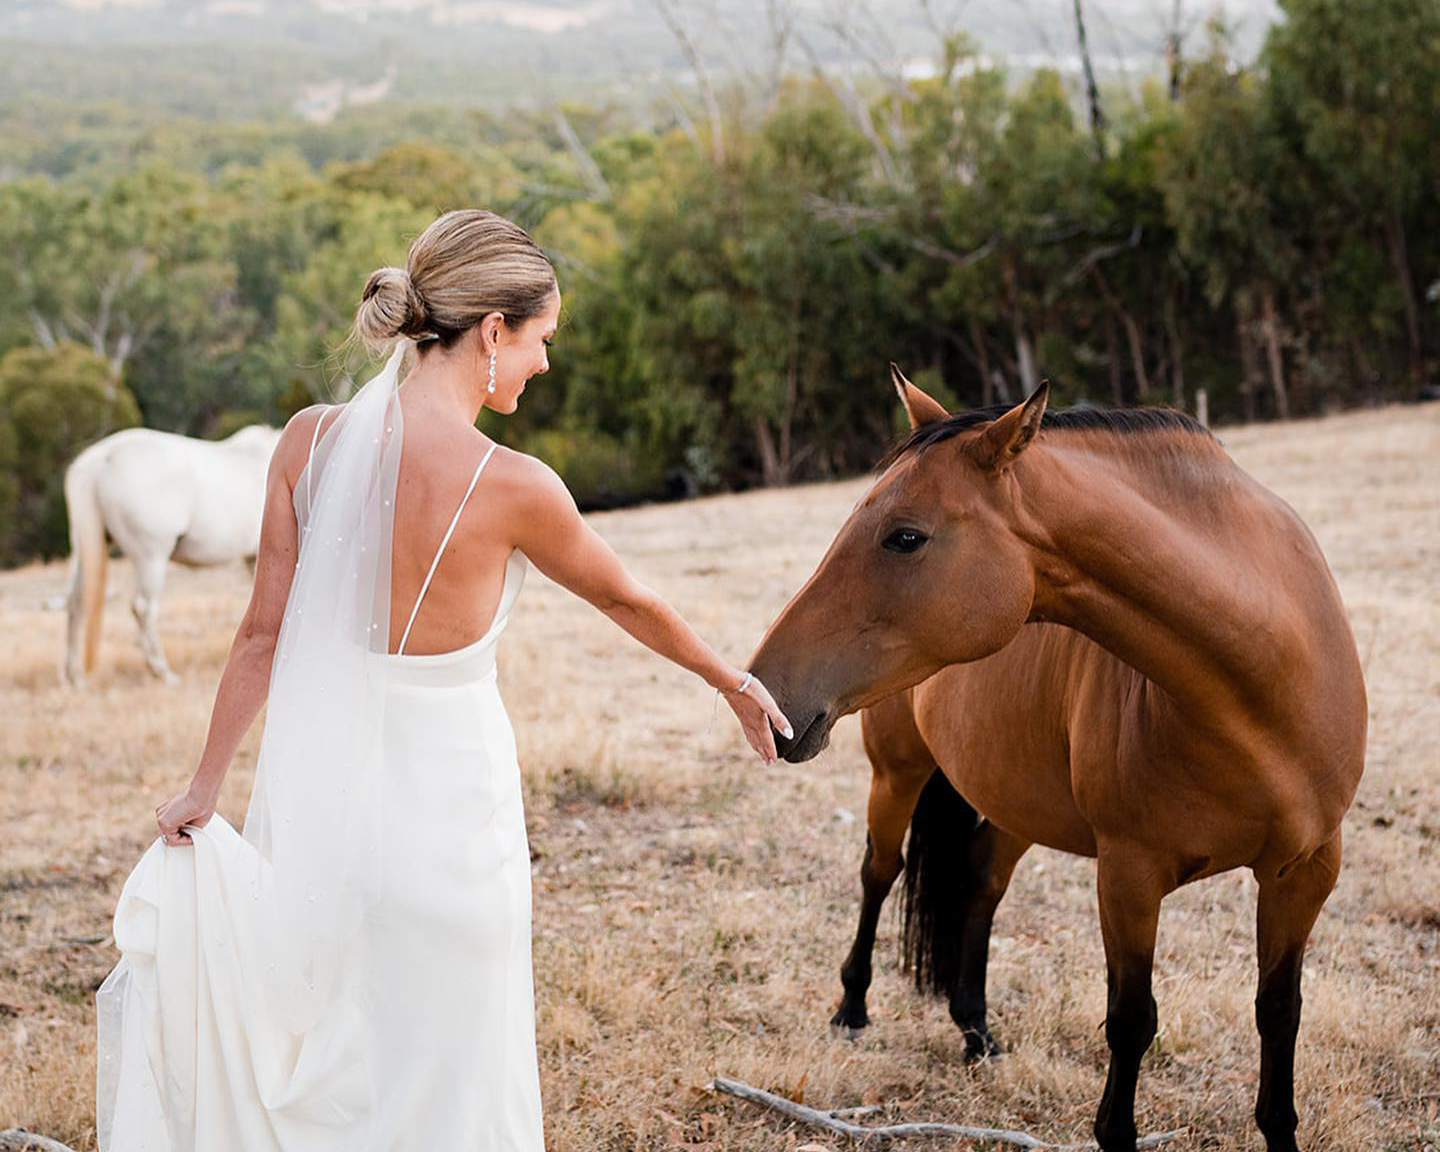 Adelaide bride taking photo with horse at wedding